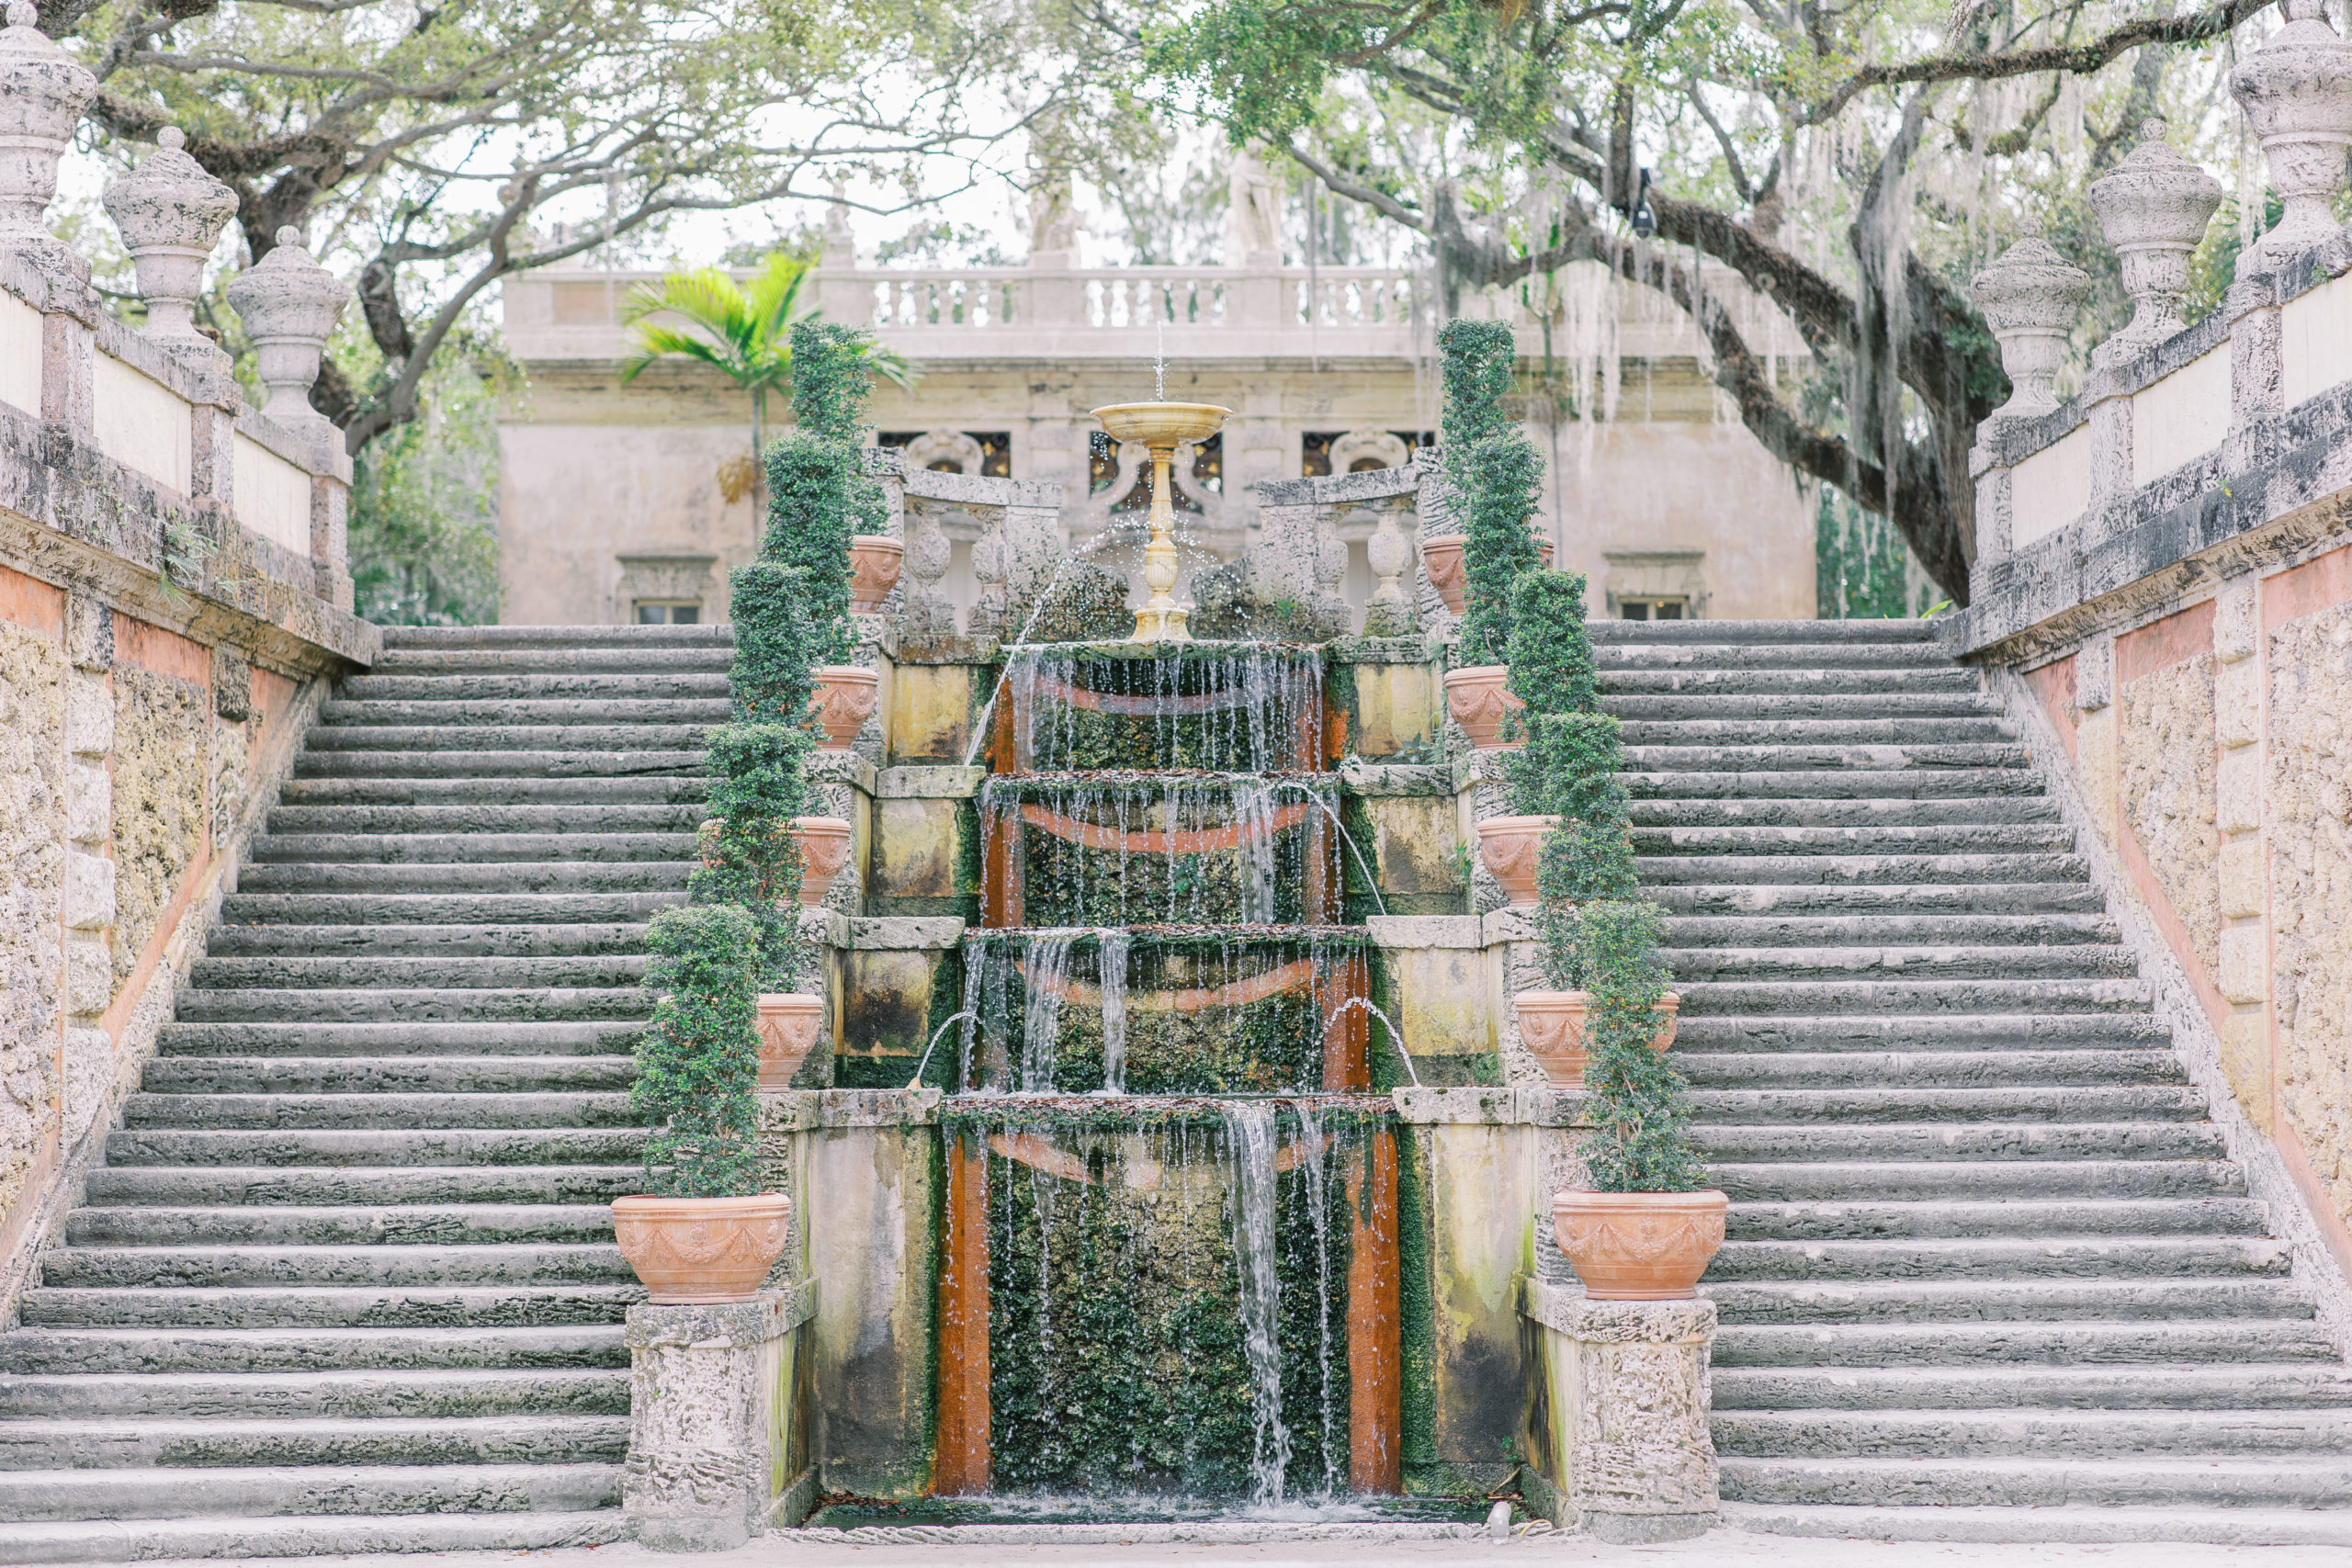 Iconic stairs at Vizcaya Museum and Gardens